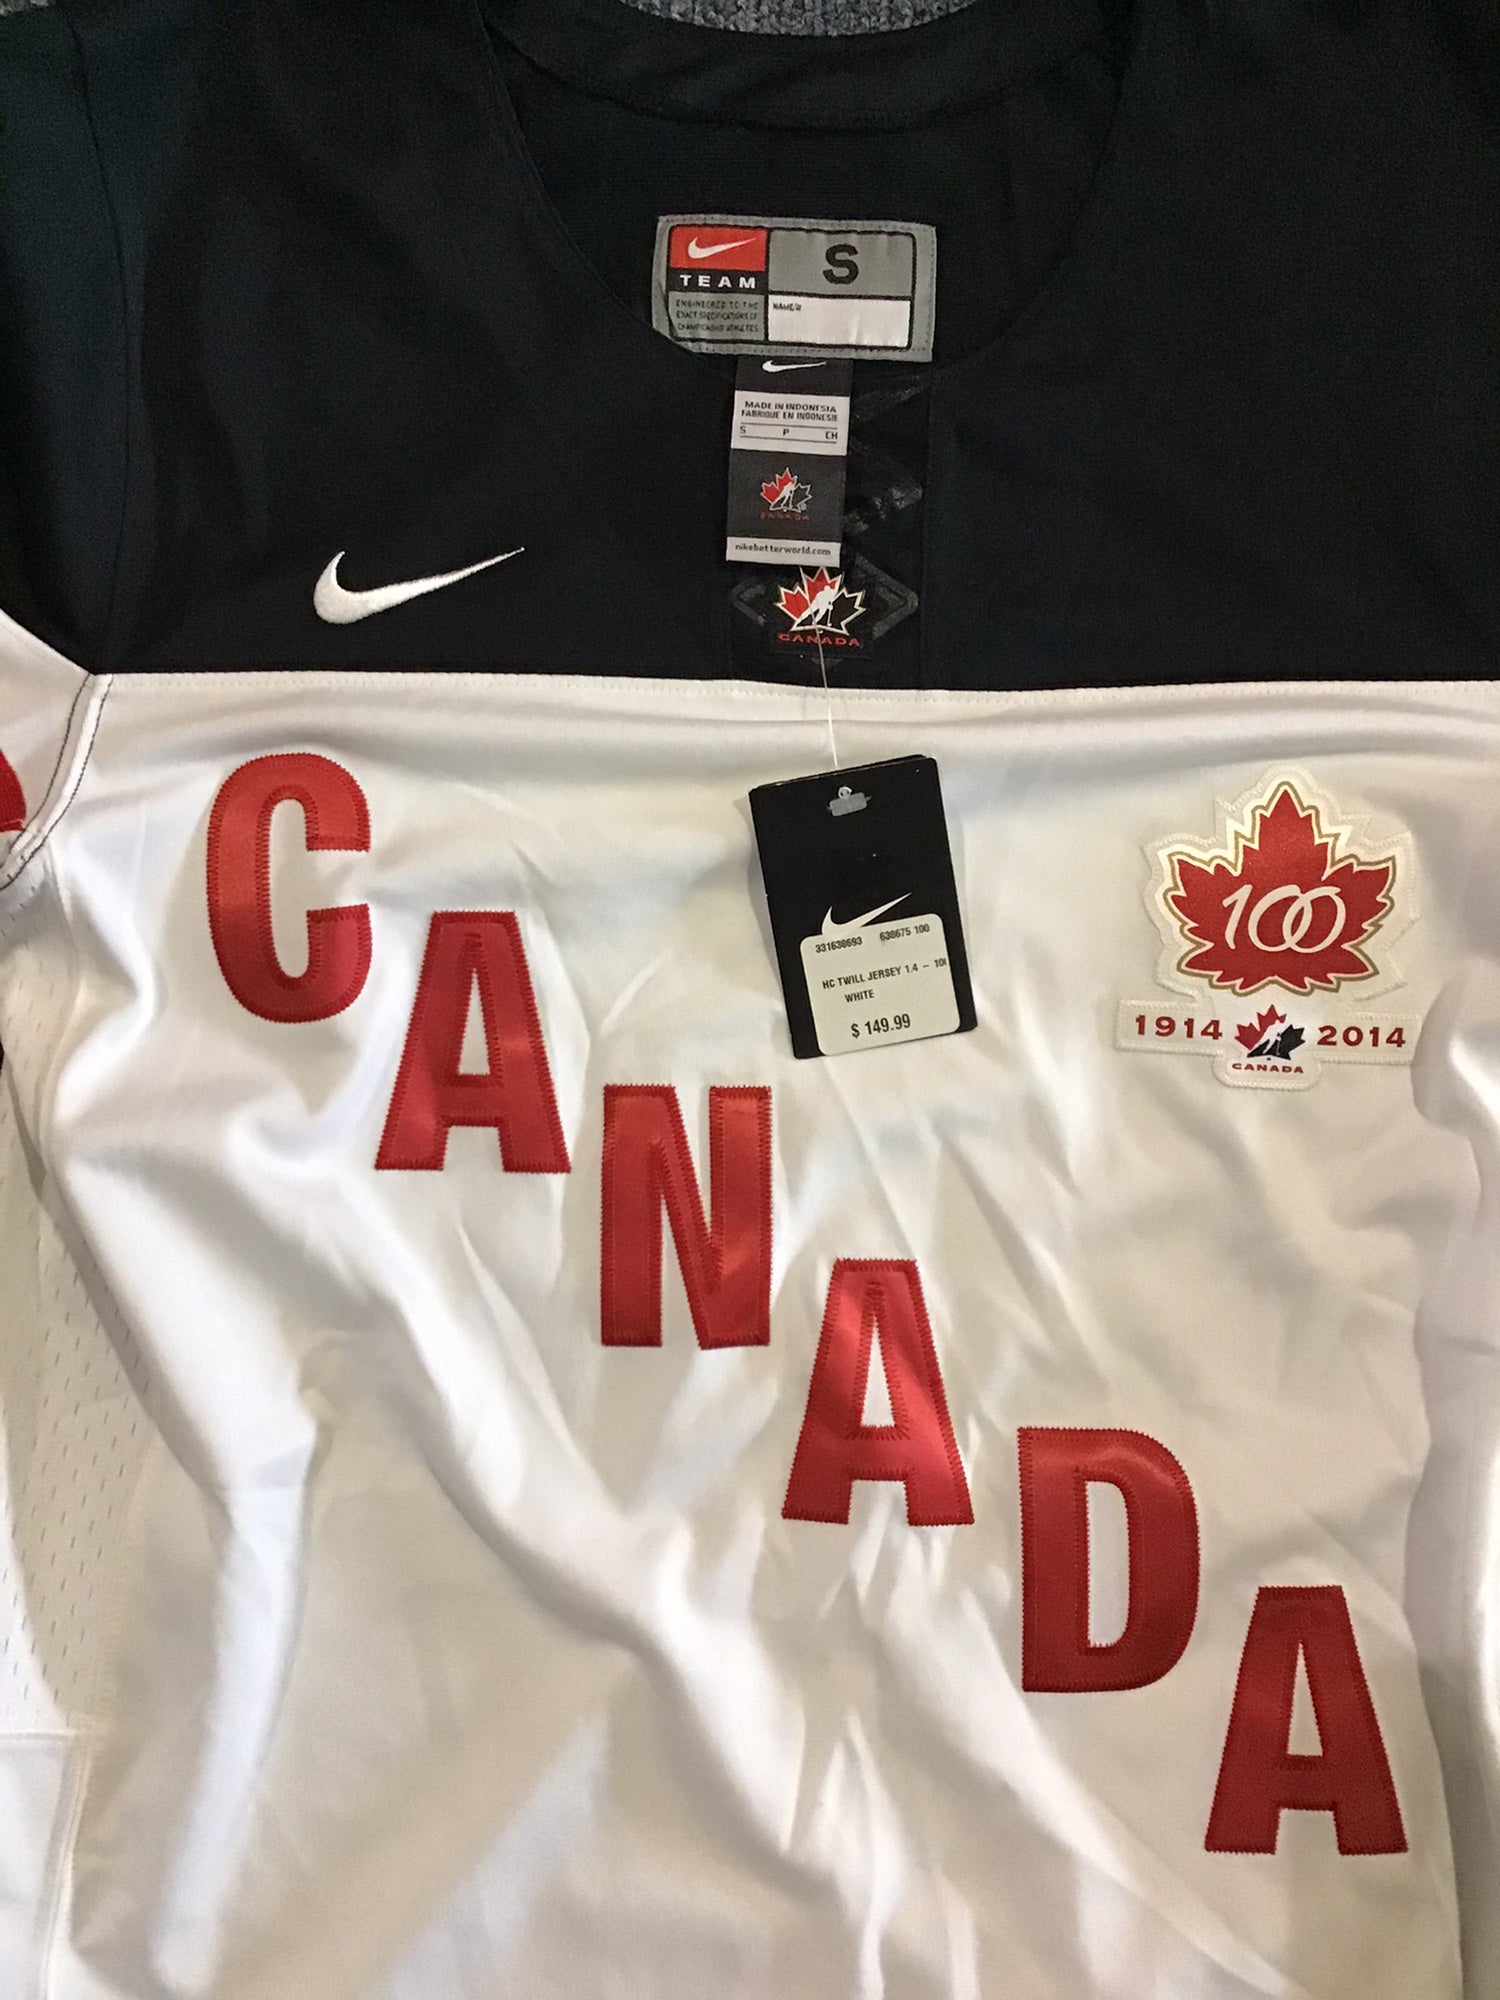 Hockey Canada unveils limited edition Nike heritage jersey for